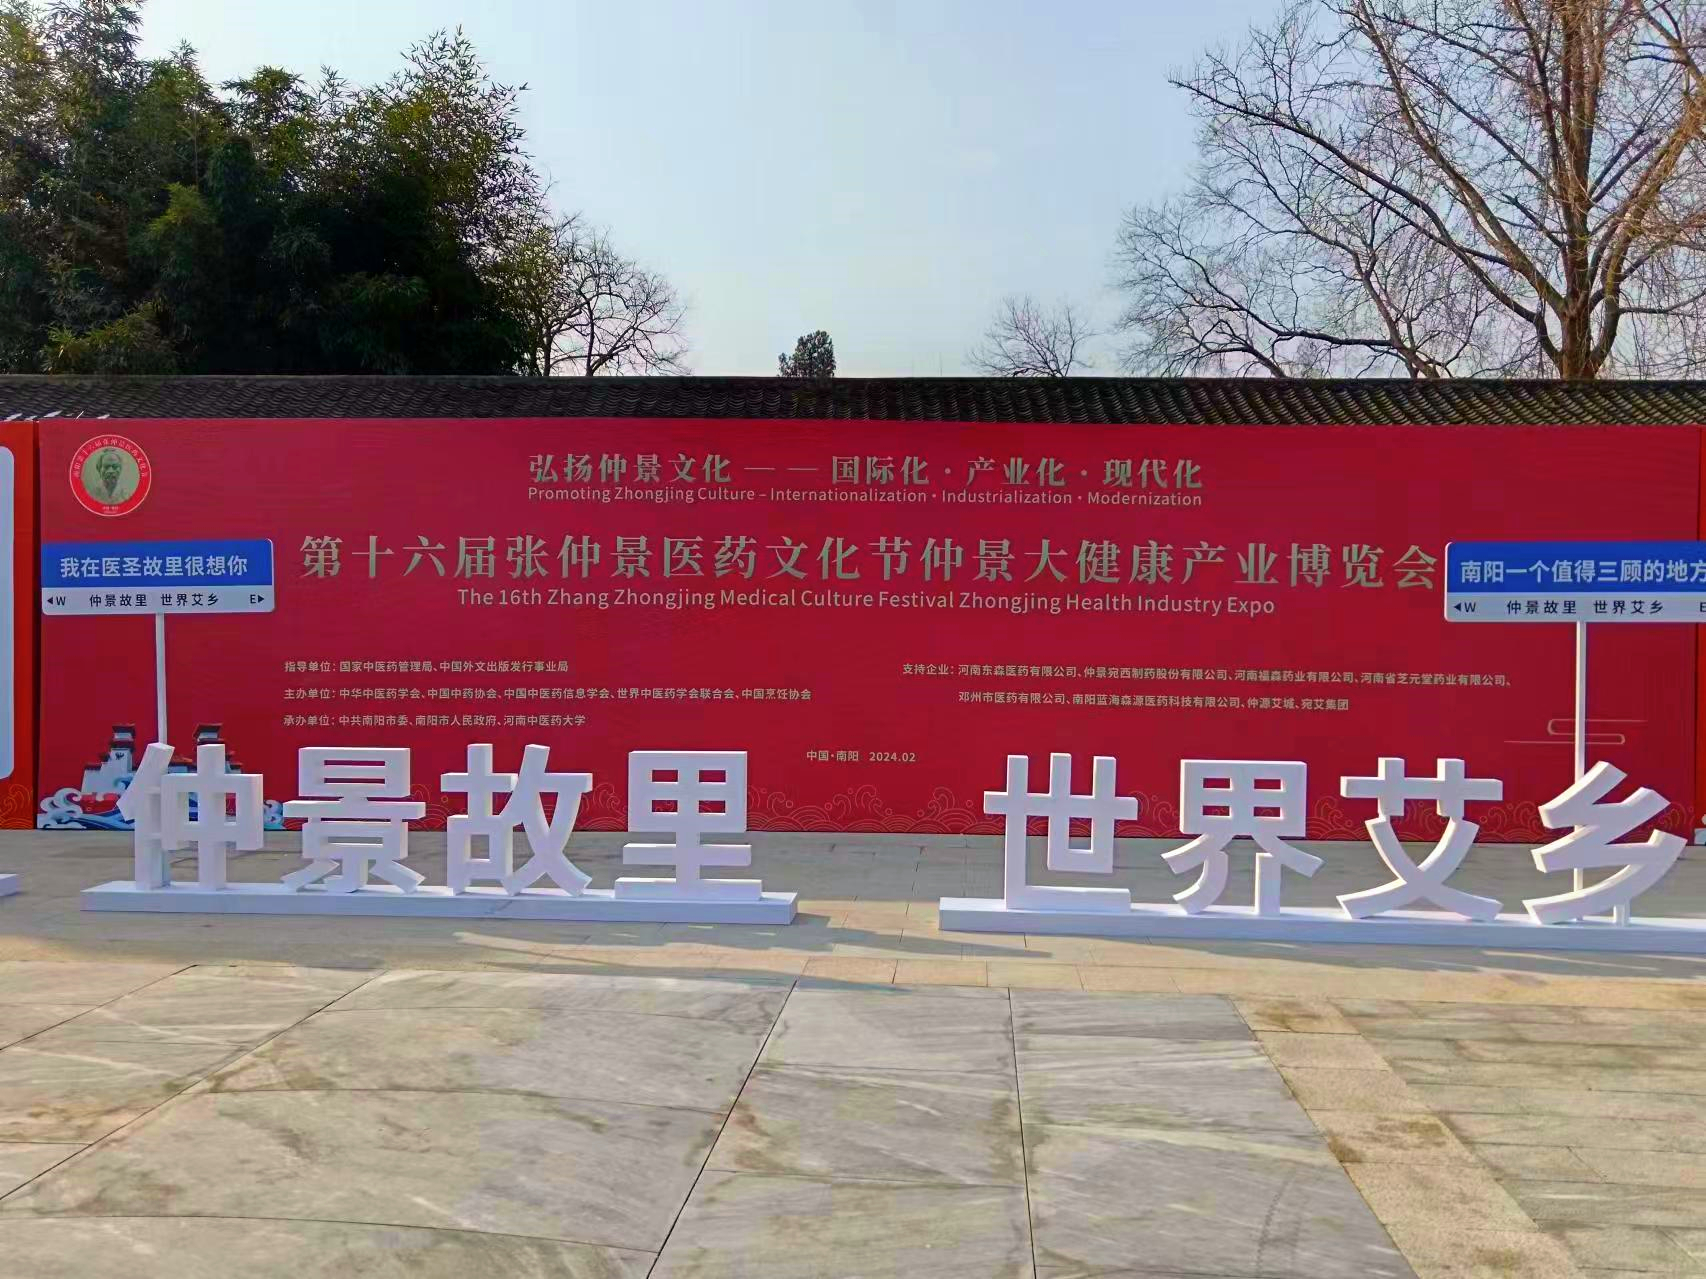 Fusen Pharmaceuticals Appears at the 16th Zhang Zhongjing Medical Culture Festival